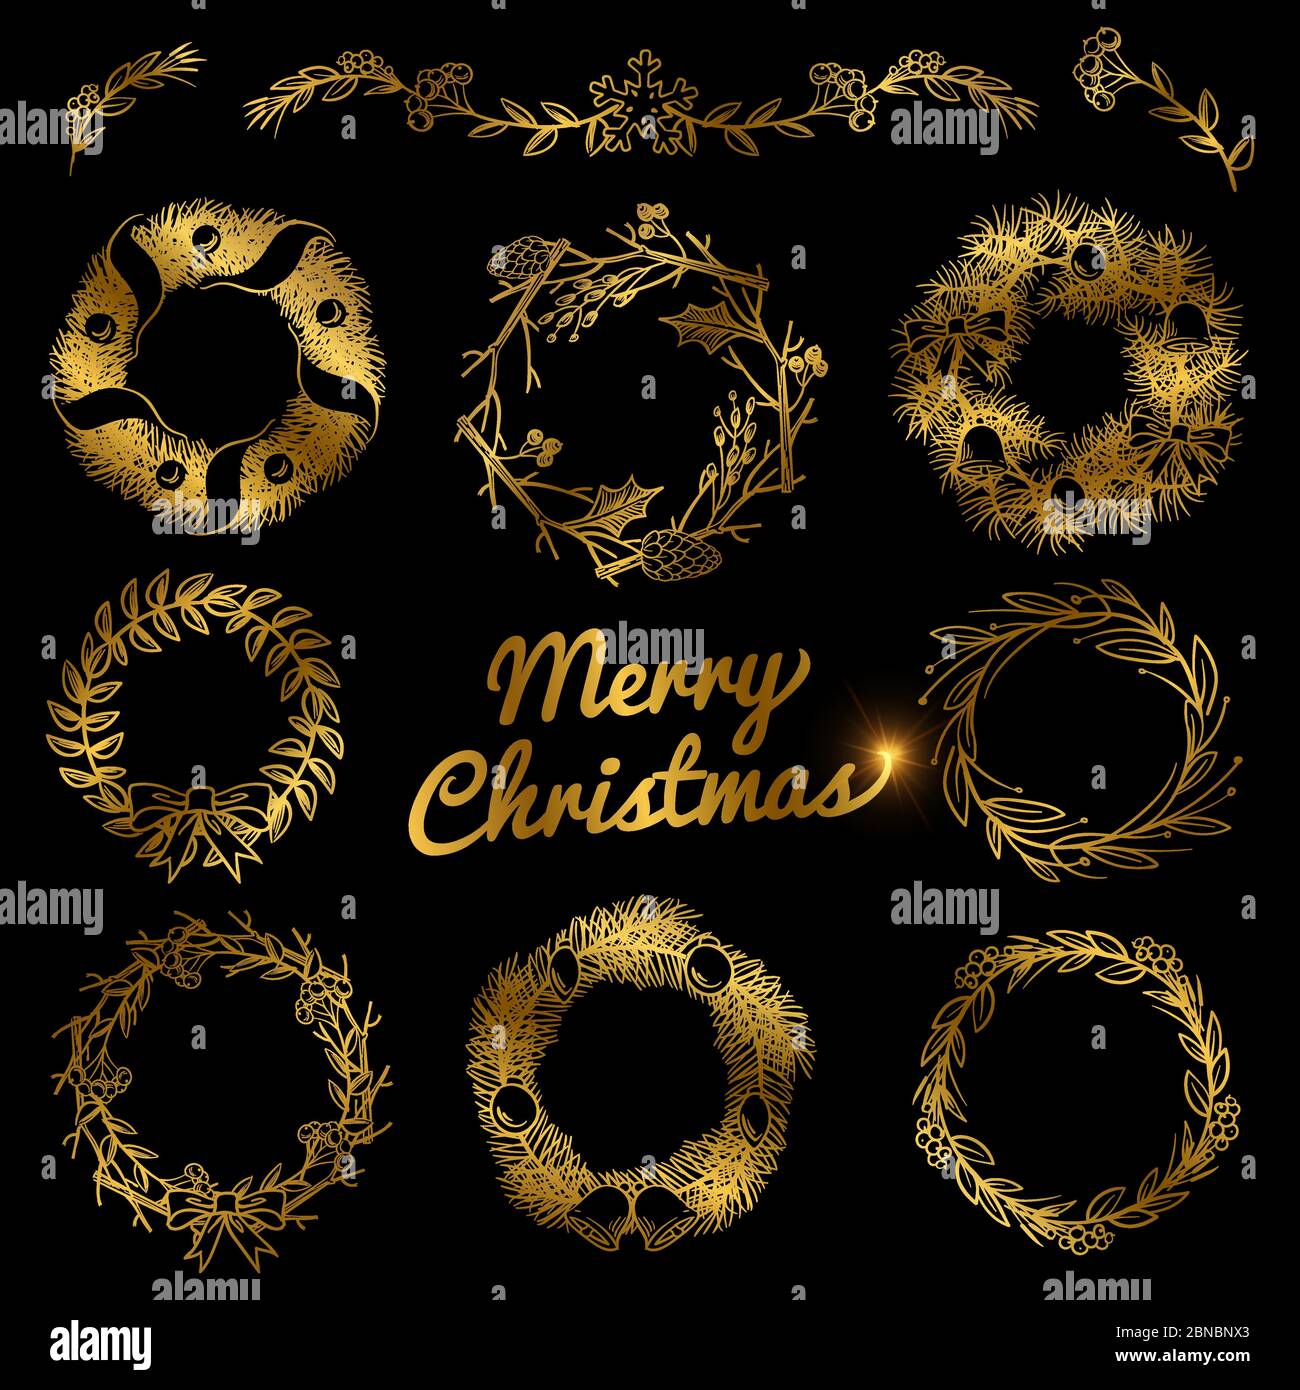 Gold Christmas hand drawn wreaths, border frames with fir branch vector isolated on black background illustration Stock Vector